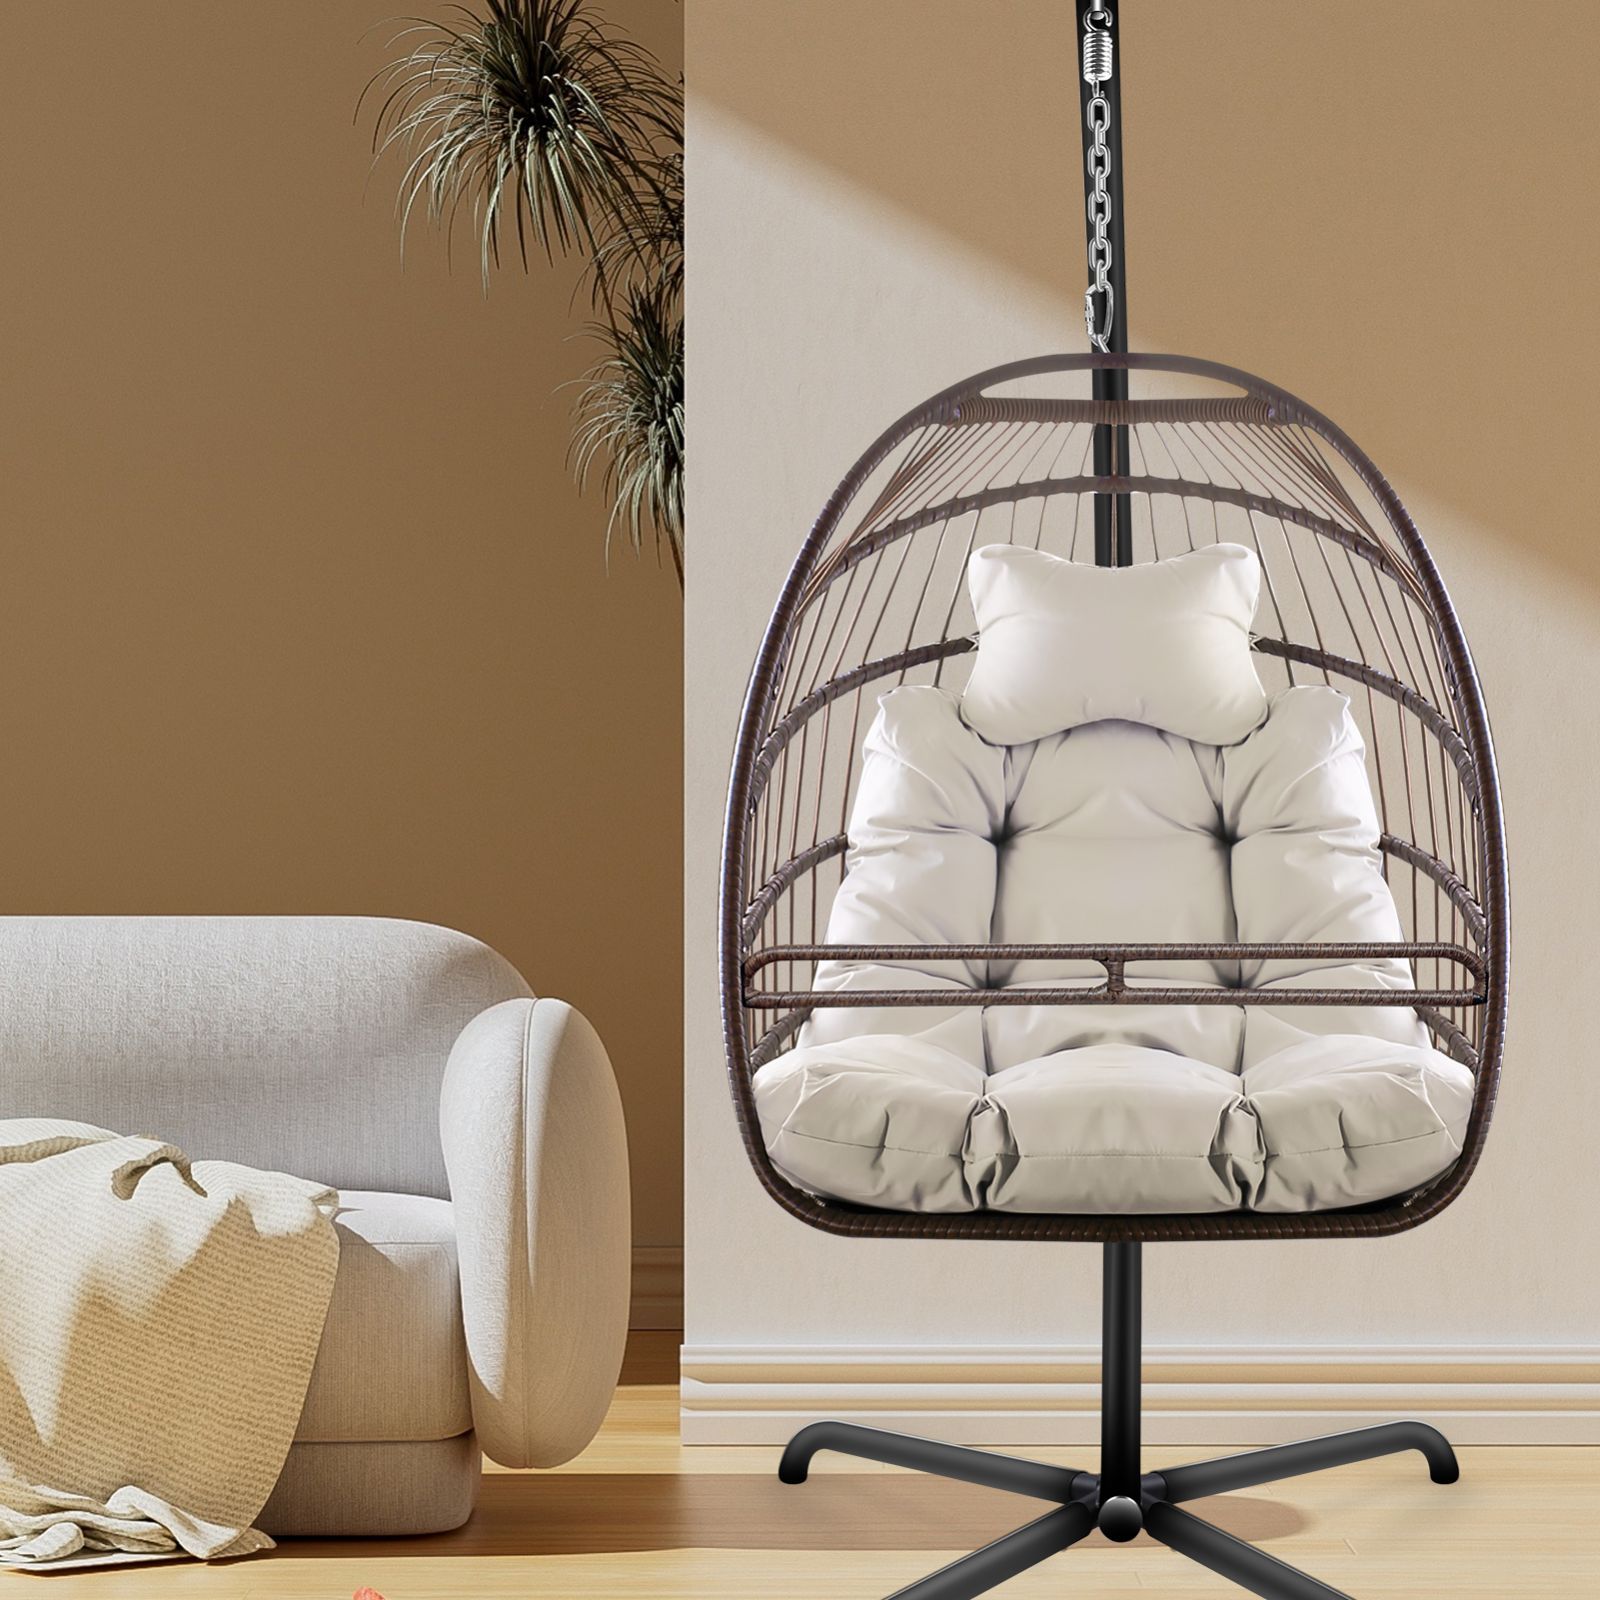 Serenity Swing Egg Chair with Guardrail, Cup Holder, and Thick Cushion